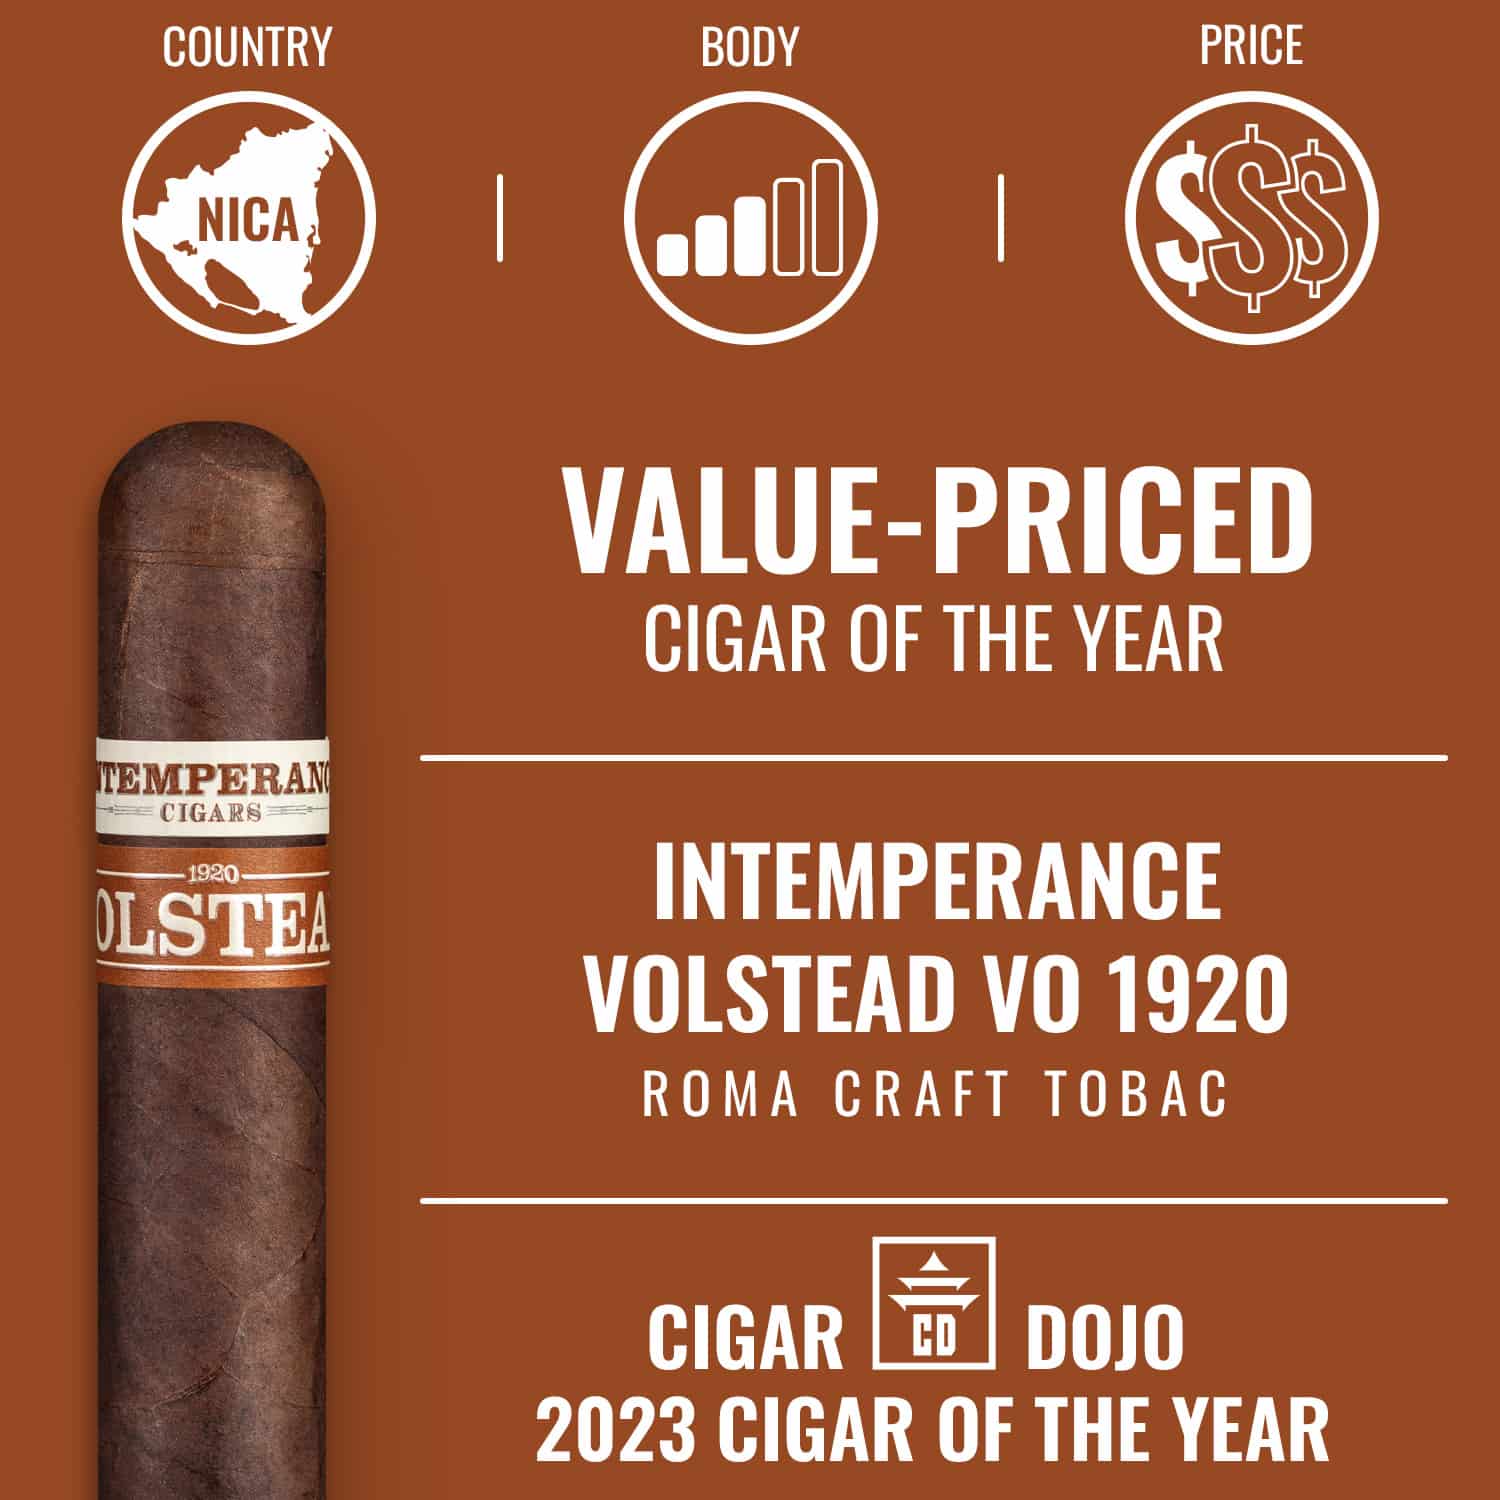 RoMa Craft Intemperance Volstead VO 1920 Value-Priced Cigar of the Year 2023